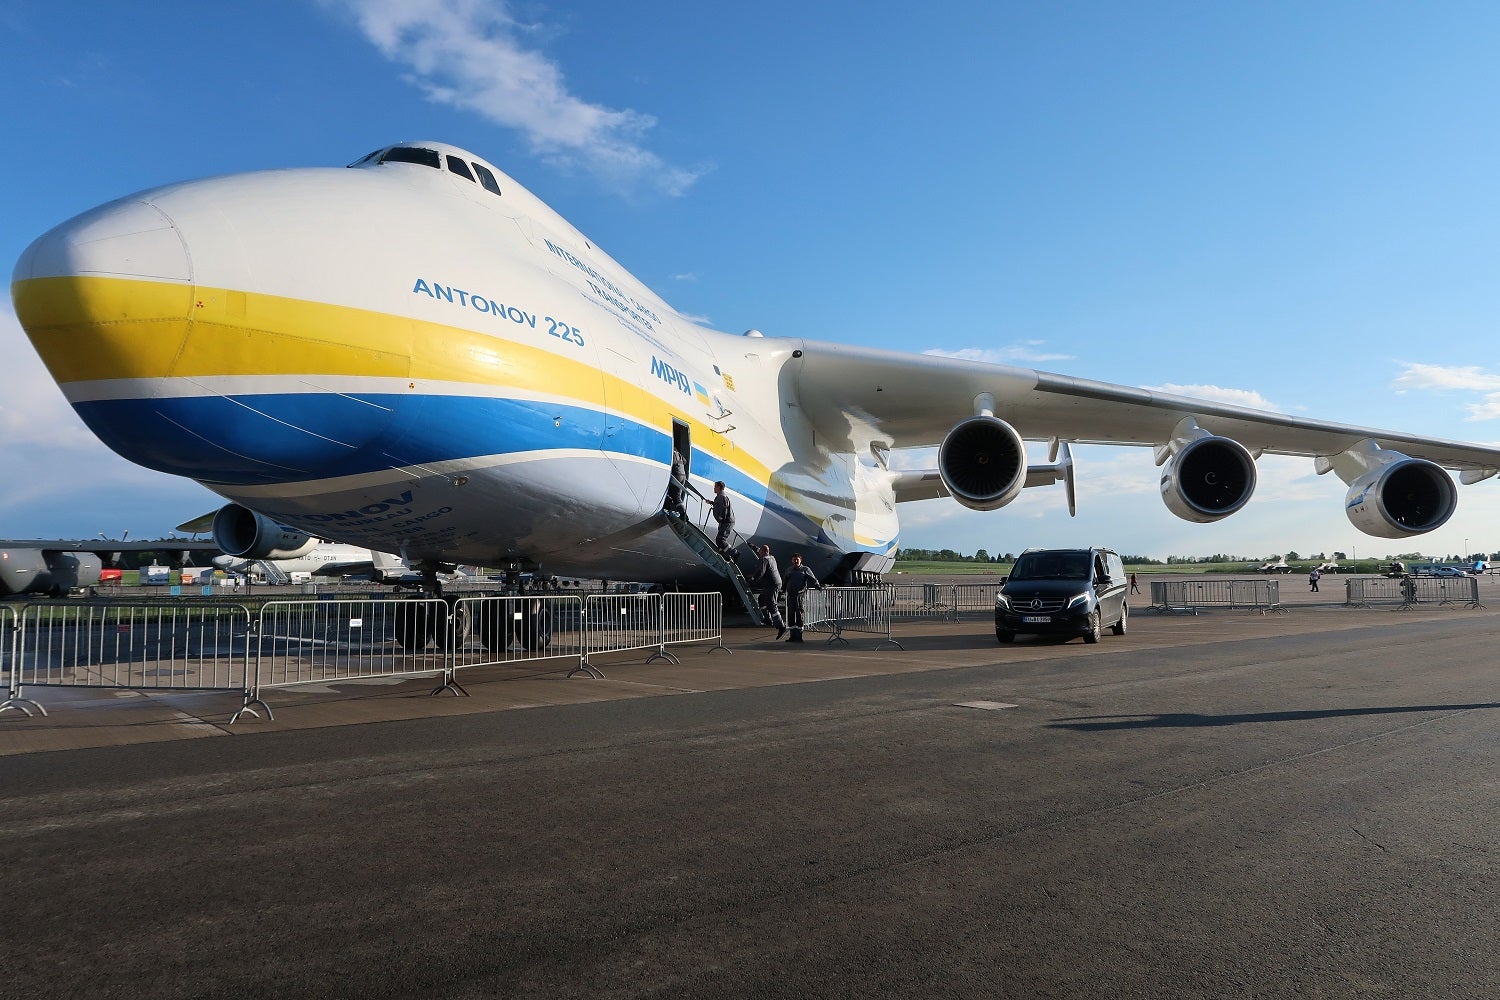 A Tour Inside the Largest Operating Aircraft in the World — the Antonov An-225...